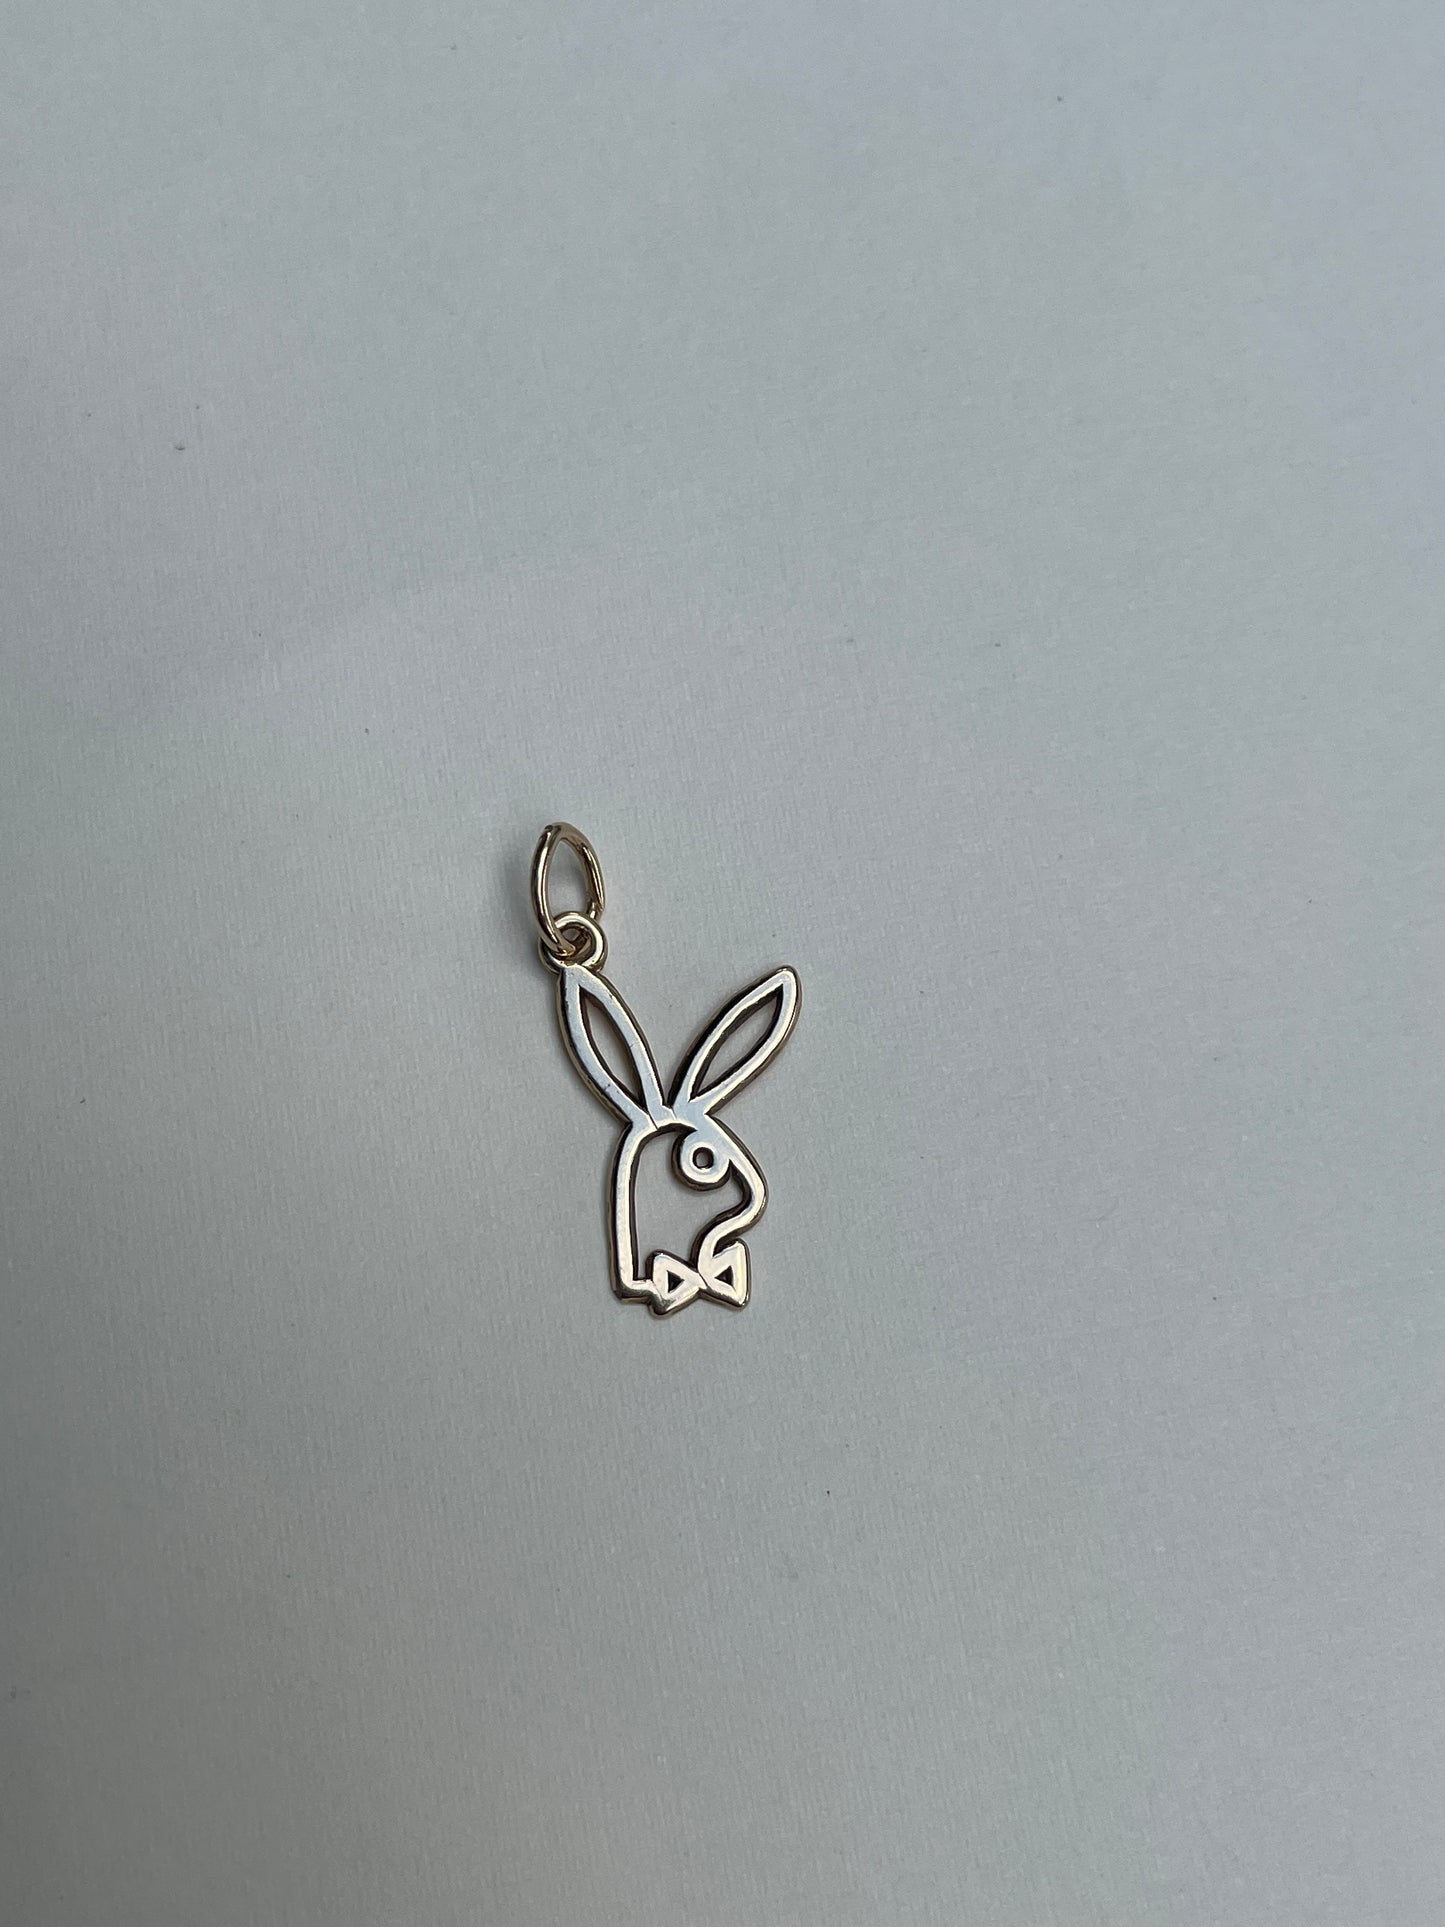 Vintage 10K Collectable Playboy Charm